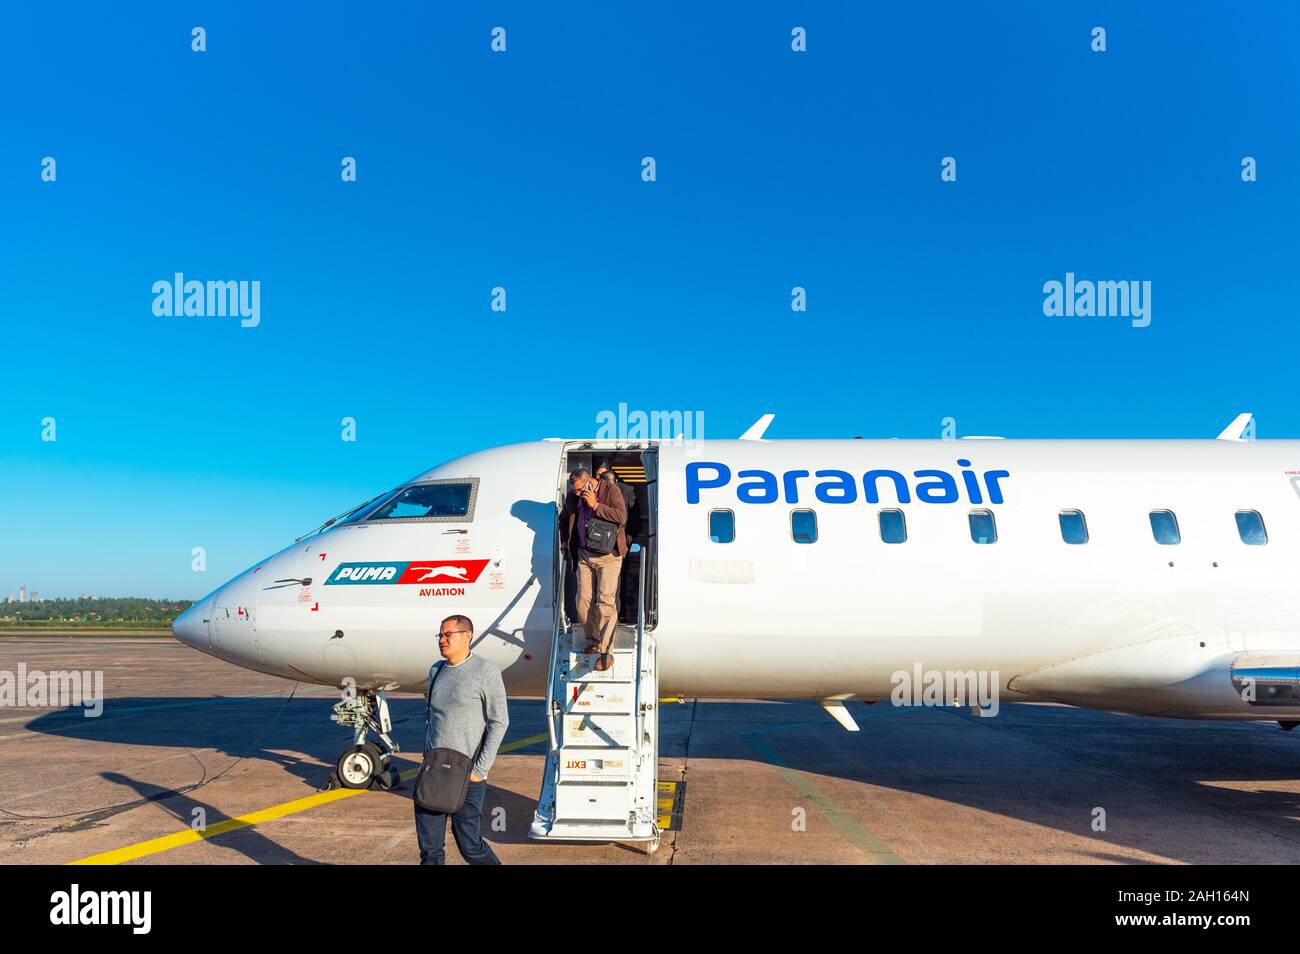 ASUNCION, PARAGUAY - JUNE 24, 2019: Men get off the plane at the airport. Copy space for text Stock Photo